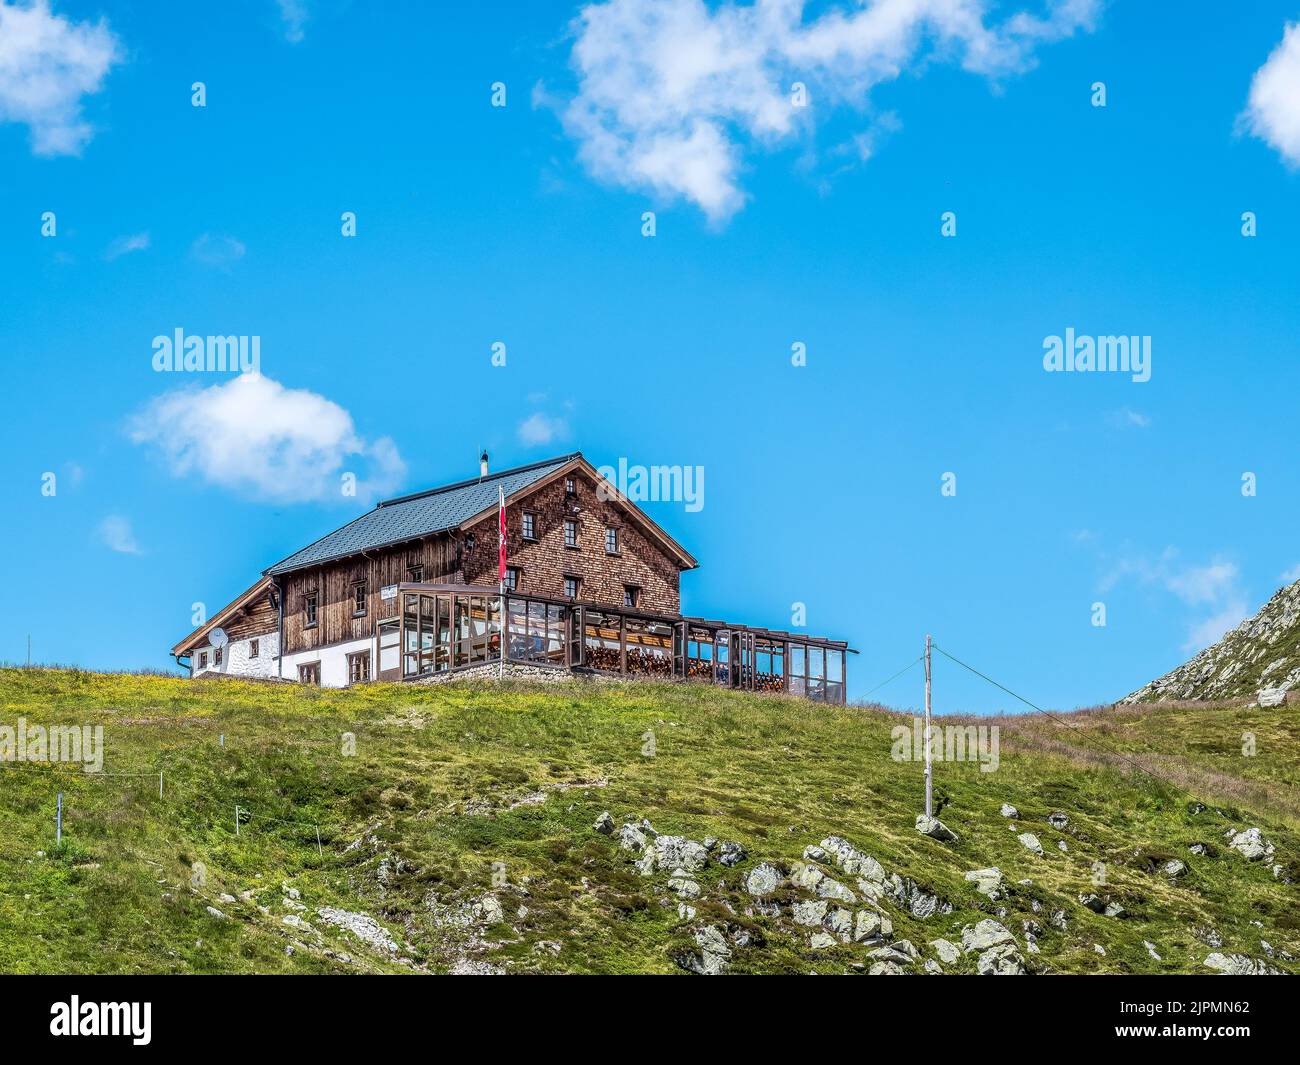 The image is of the Tuxerjoch Haus mountain refuge above Hinter Tux not far from the resort town of Mayrhofen in the Zillertal Alps Stock Photo